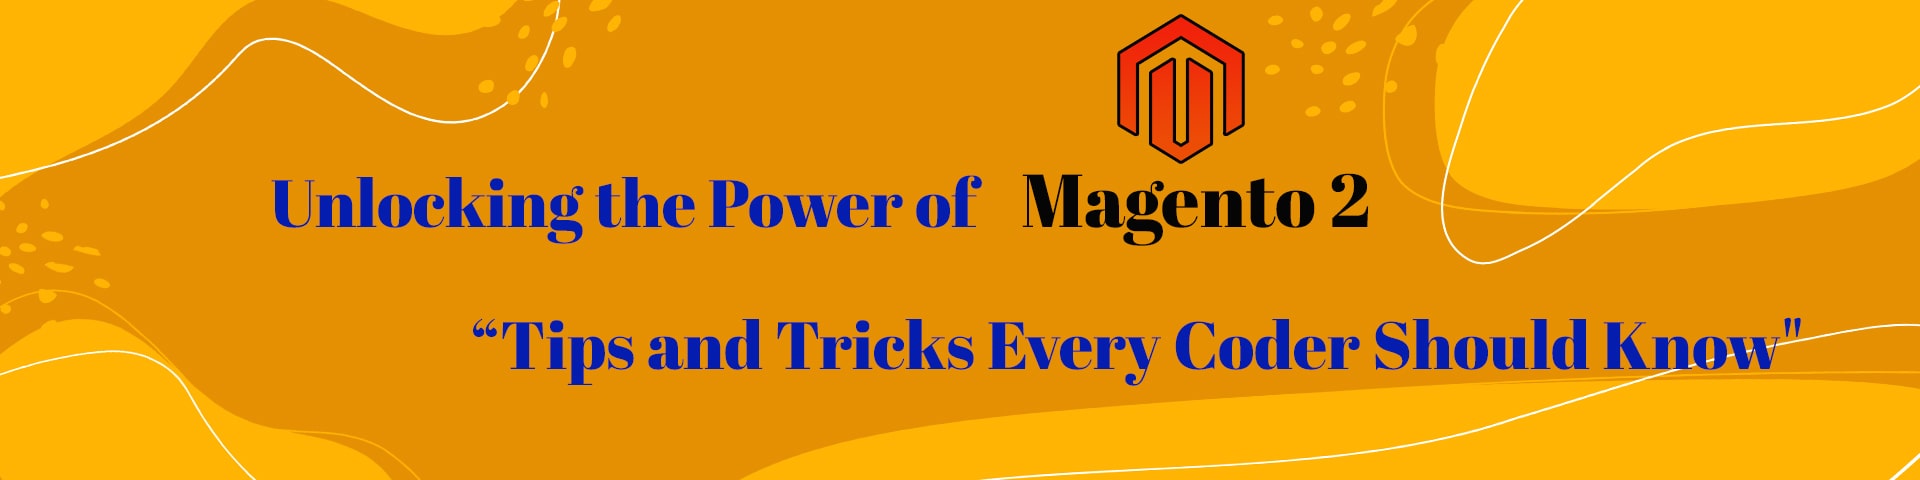 TopTips and Tricks of Magento 2 for Every Coder